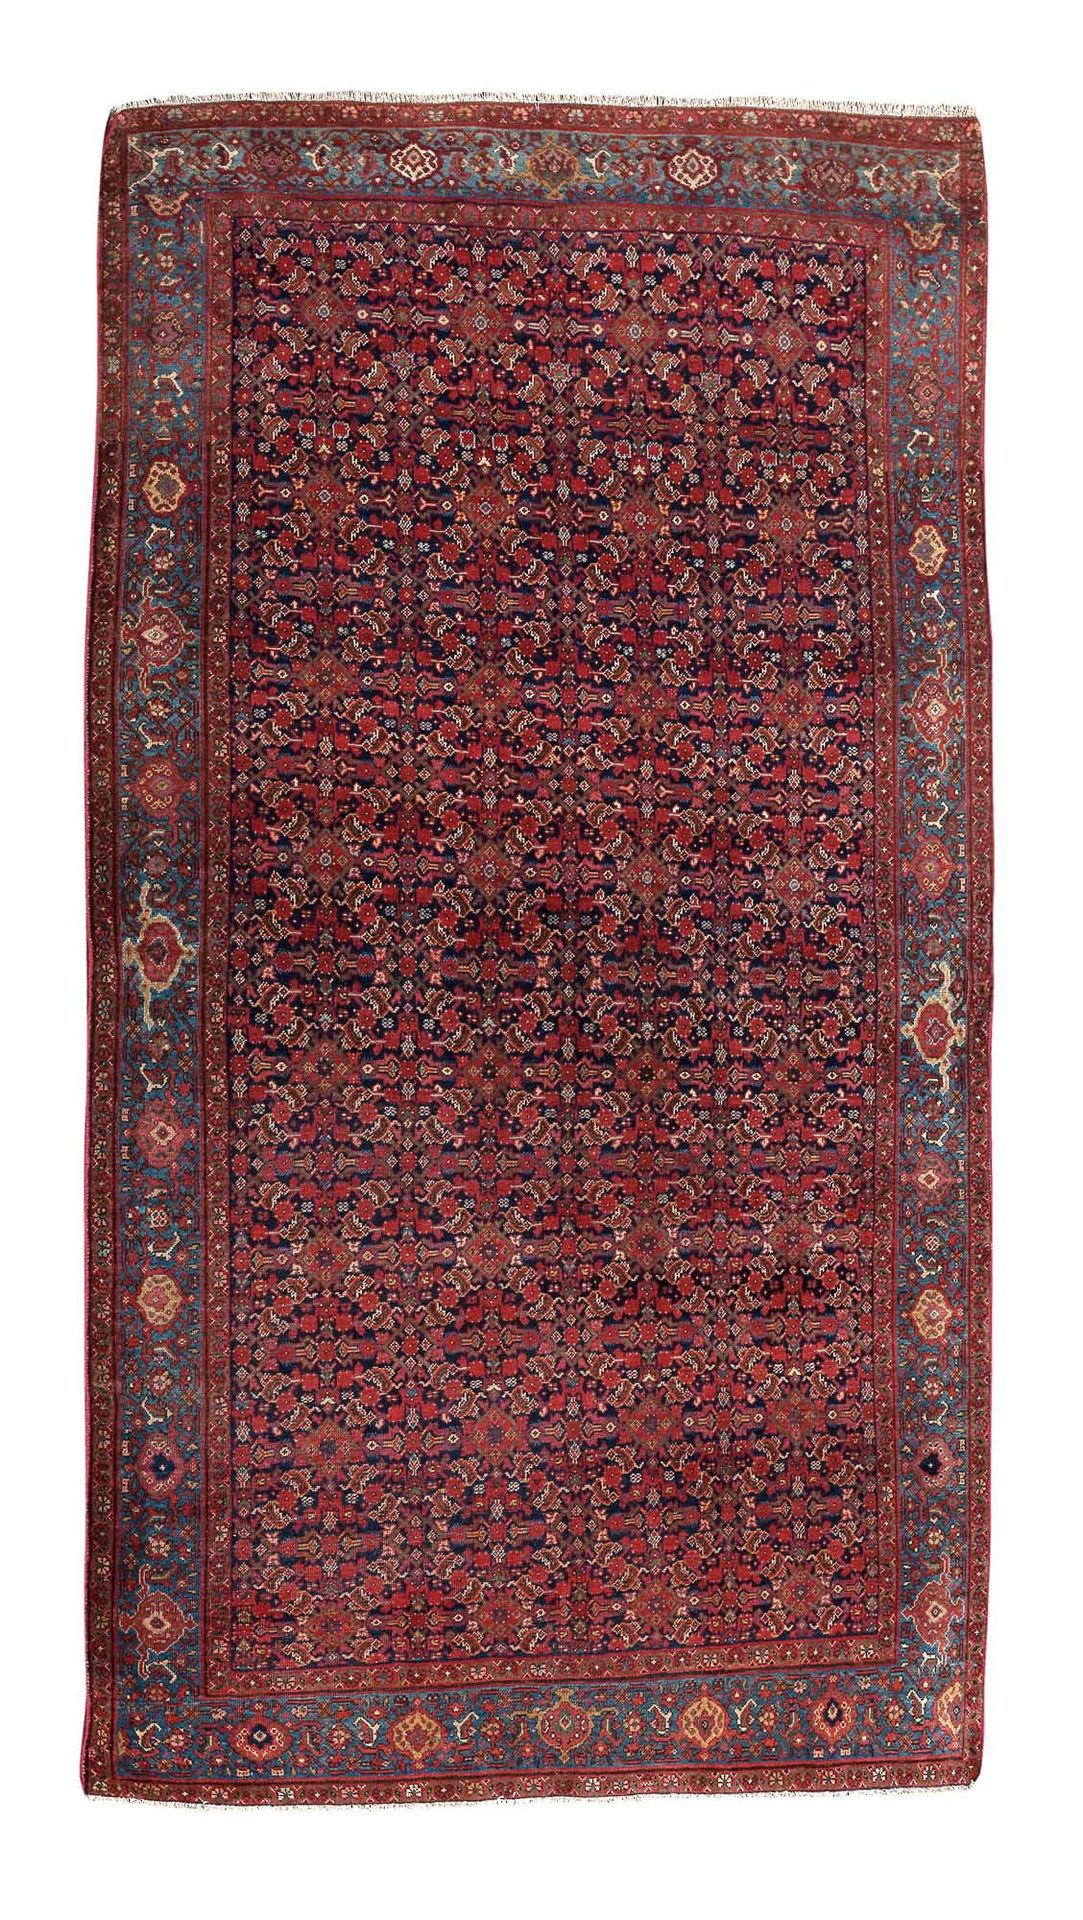 Null FERAHAN carpet (Persia), end of the 19th century

Dimensions : 200 x 122cm
&hellip;